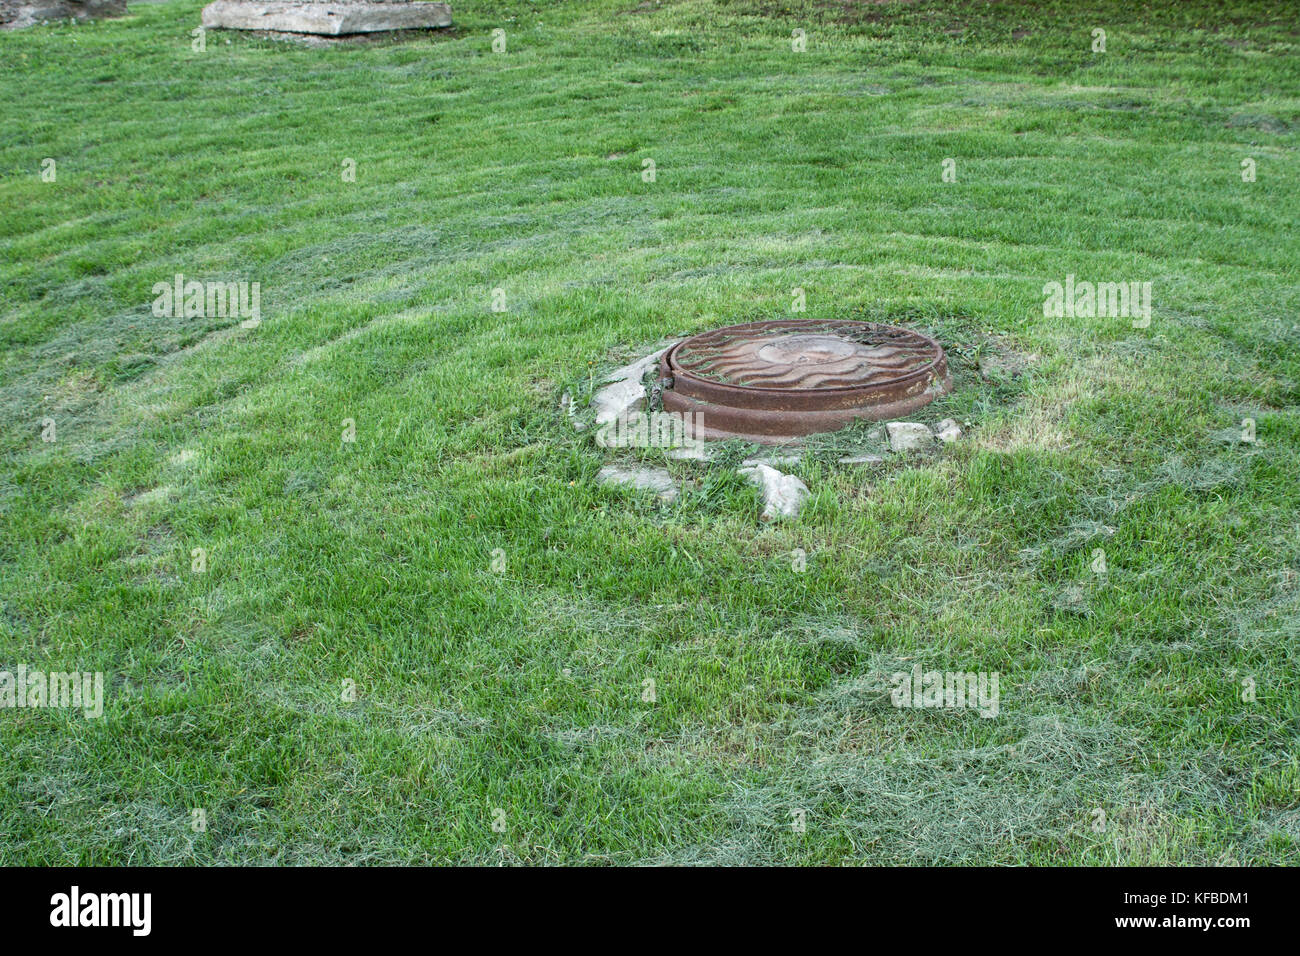 Rusty manhole on the lawn mowed in circles Stock Photo